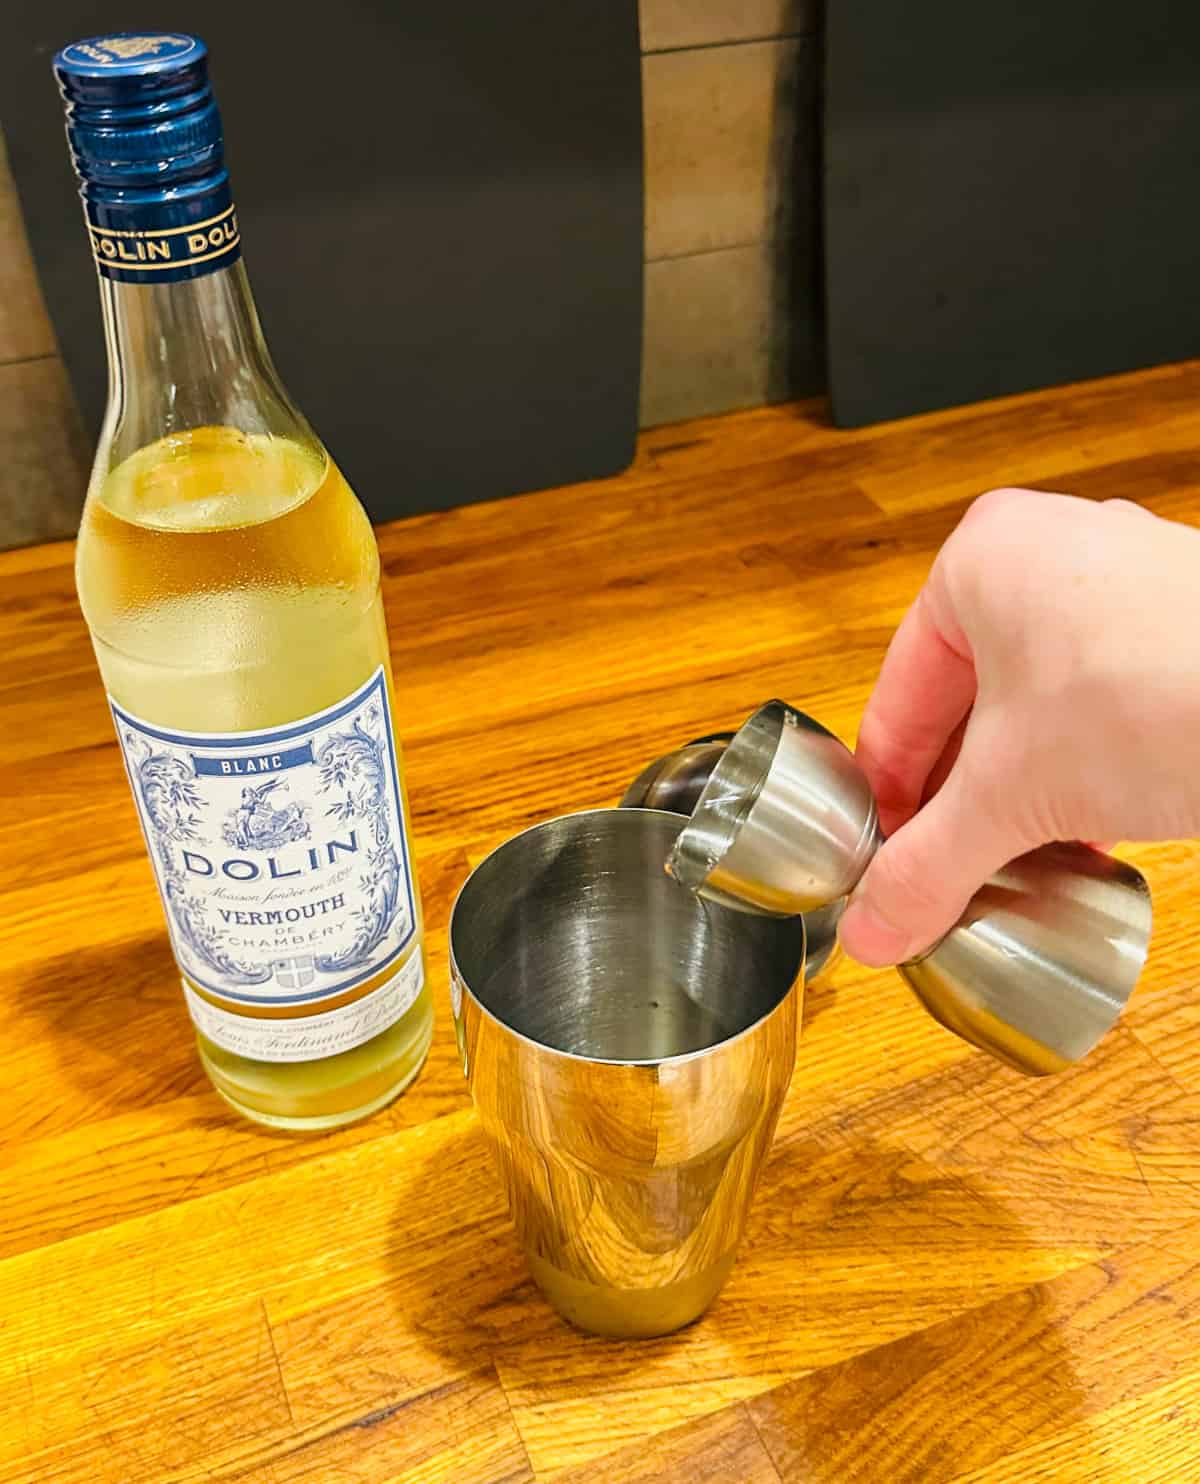 Clear liquid being poured from a steel measuring jigger into a cocktail shaker next to a bottle of Dolin blanc vermouth.